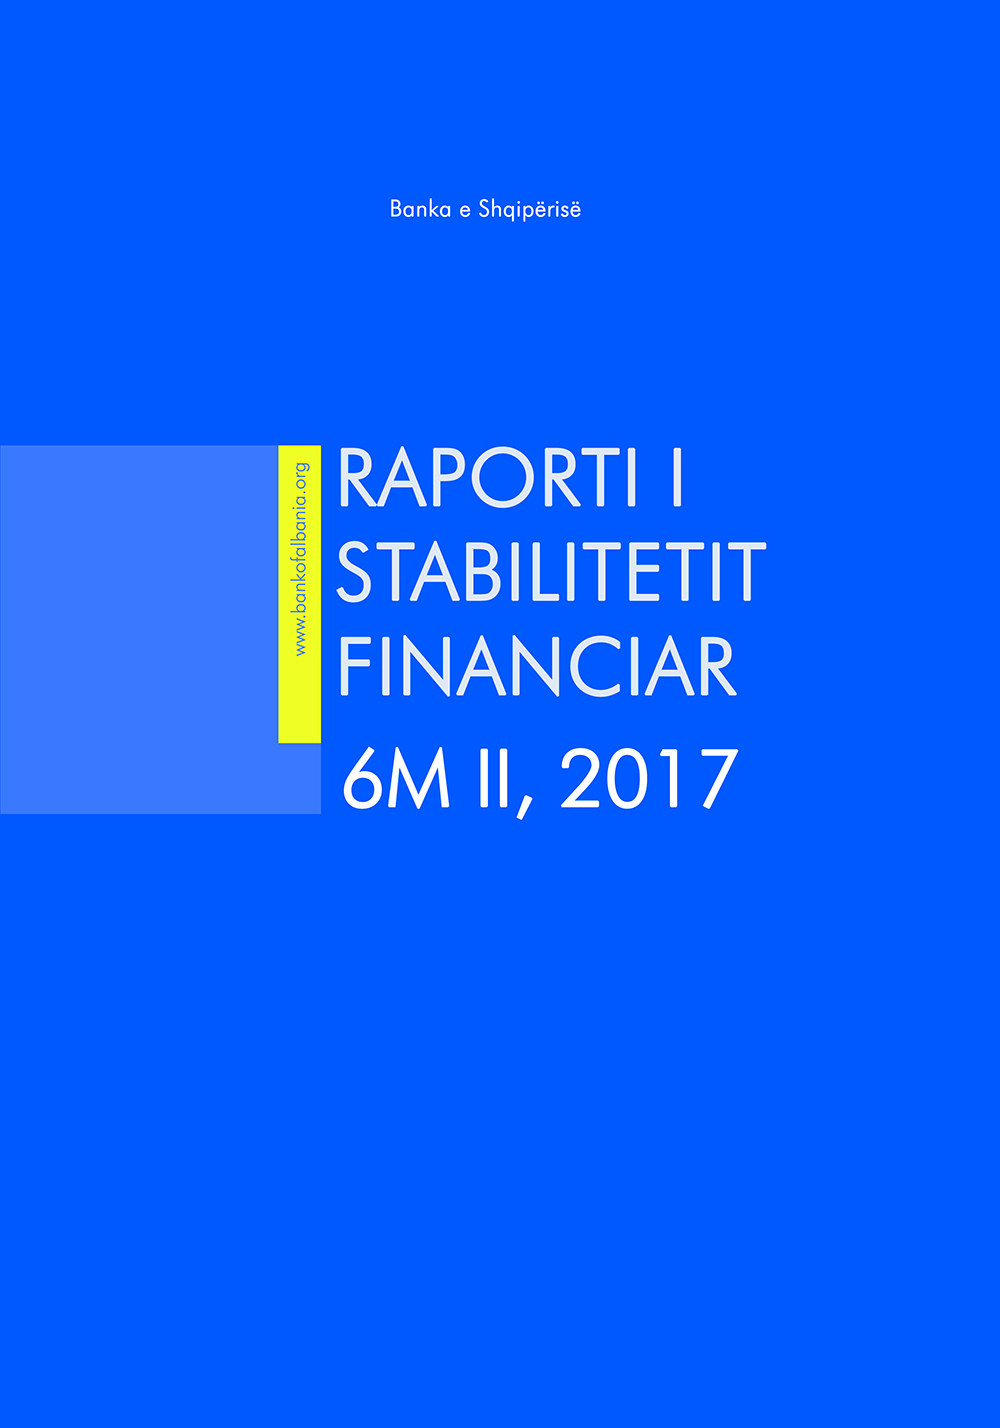 Financial Stability Report - 2017 H2